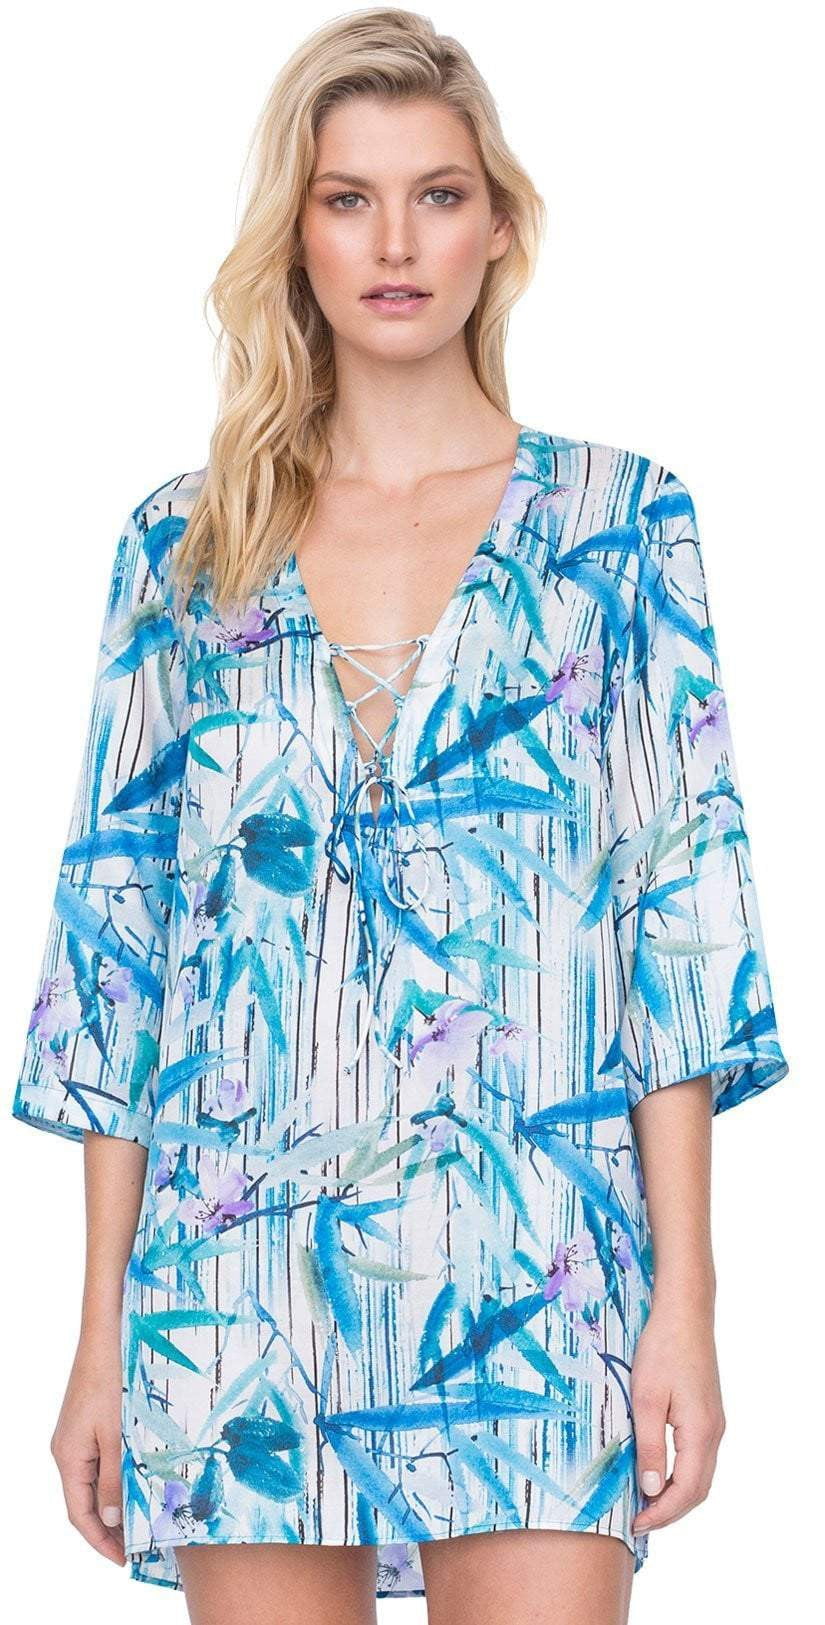 Gottex Exotic Paradise Tunic Cover Up 19EP622 086: